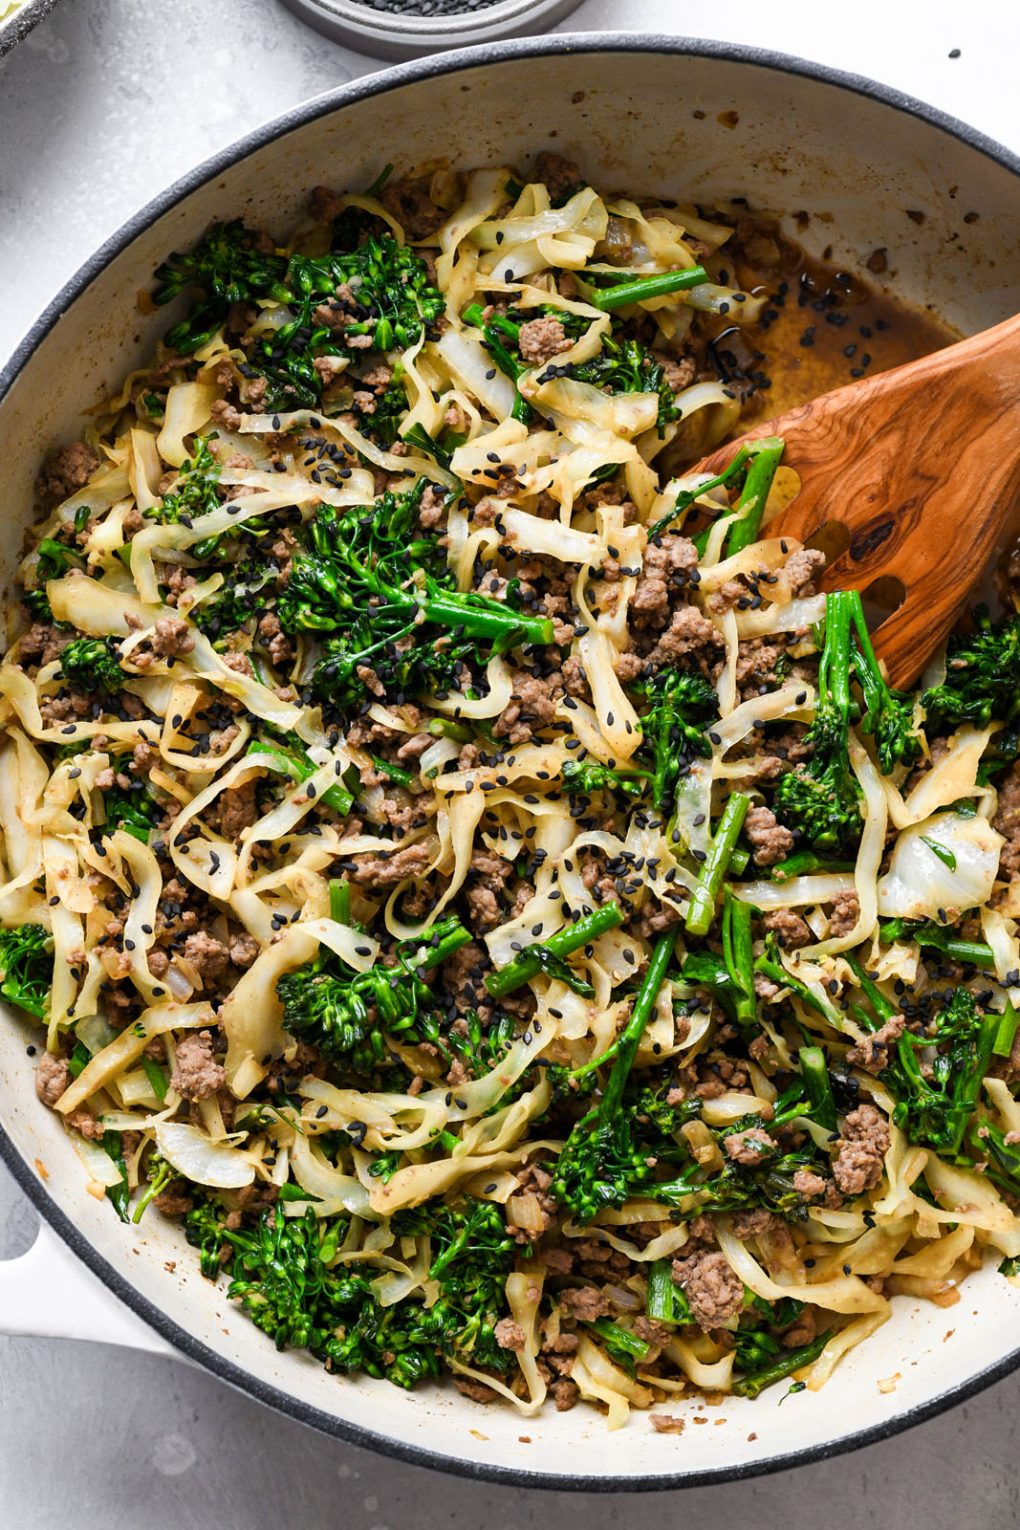 Overhead shot of a large cream colored ceramic skillet filled with ground beef and cabbage whole30 stir fry with cut up broccolini, and topped with black sesame seeds. 